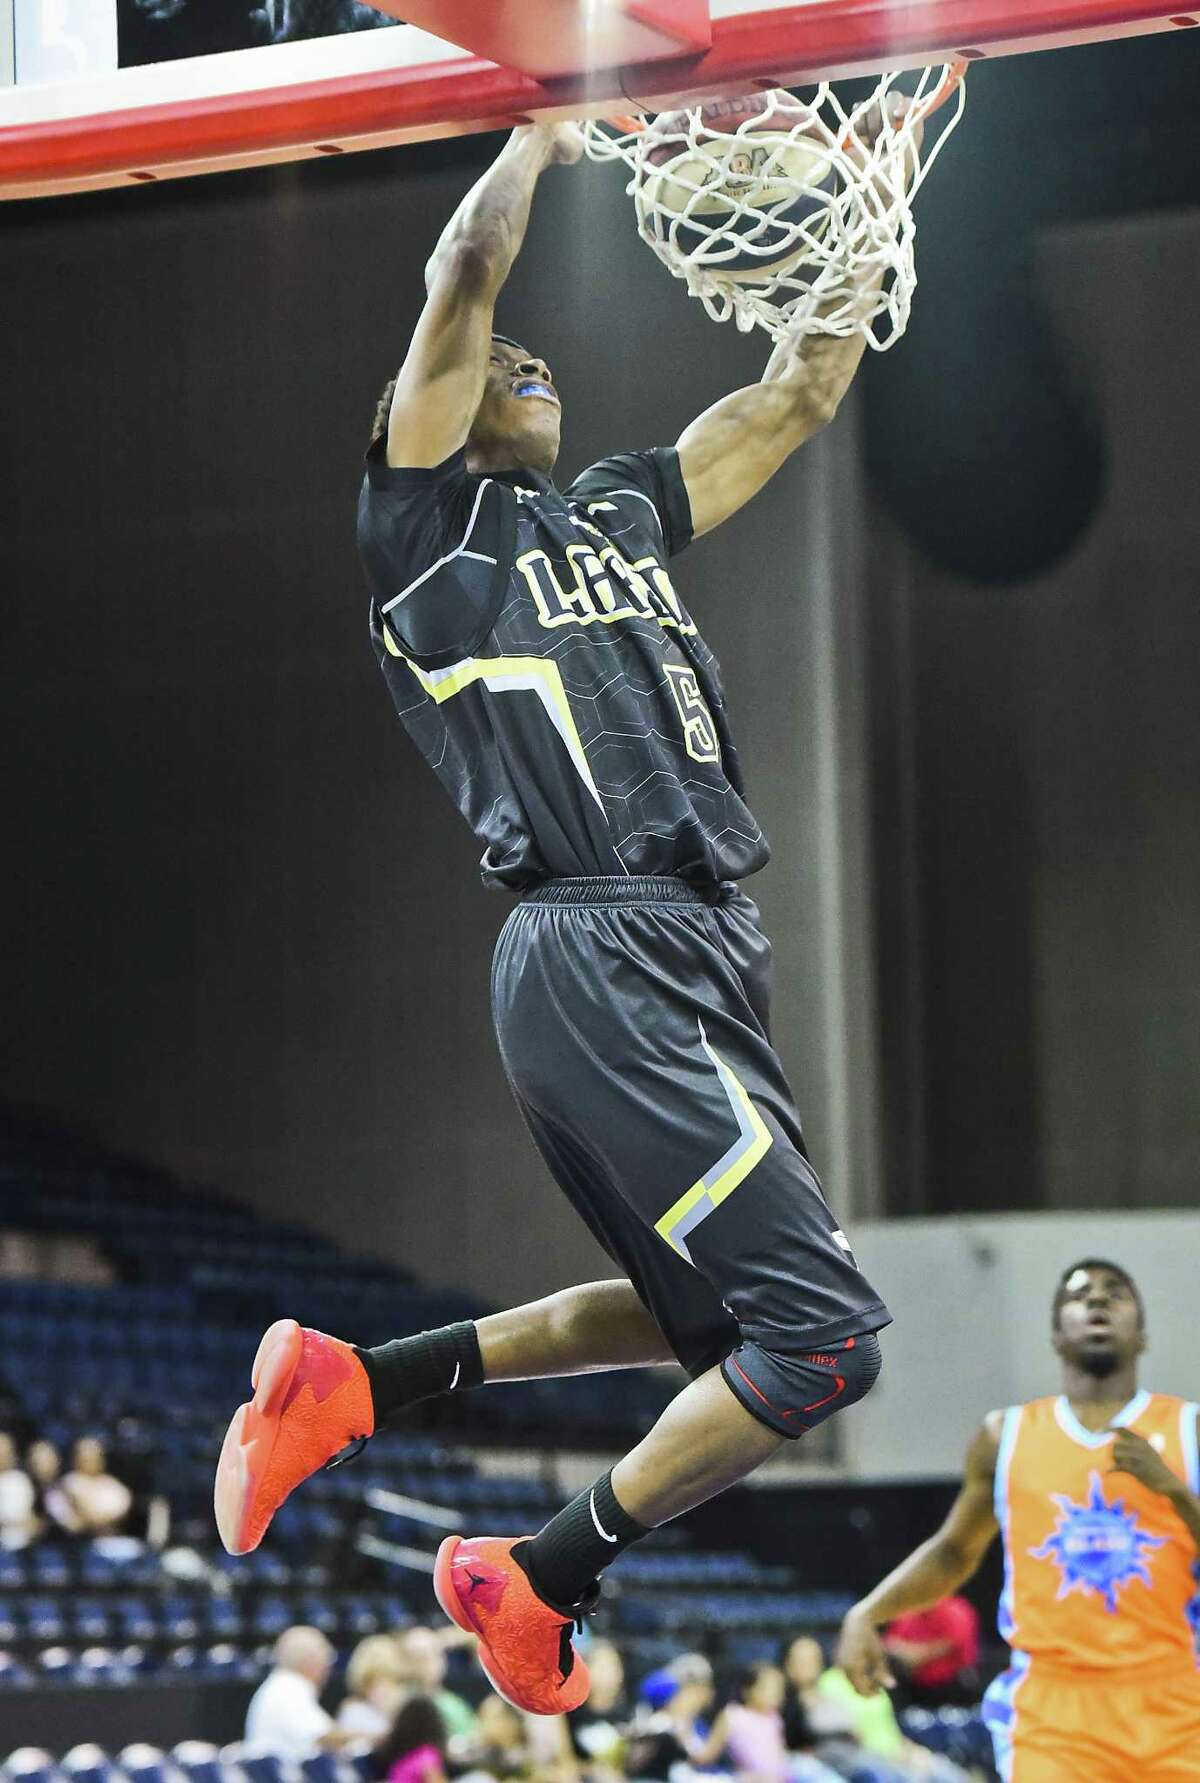 Stevan Harris scored 10 points at the Swarm won their sixth straight at home.